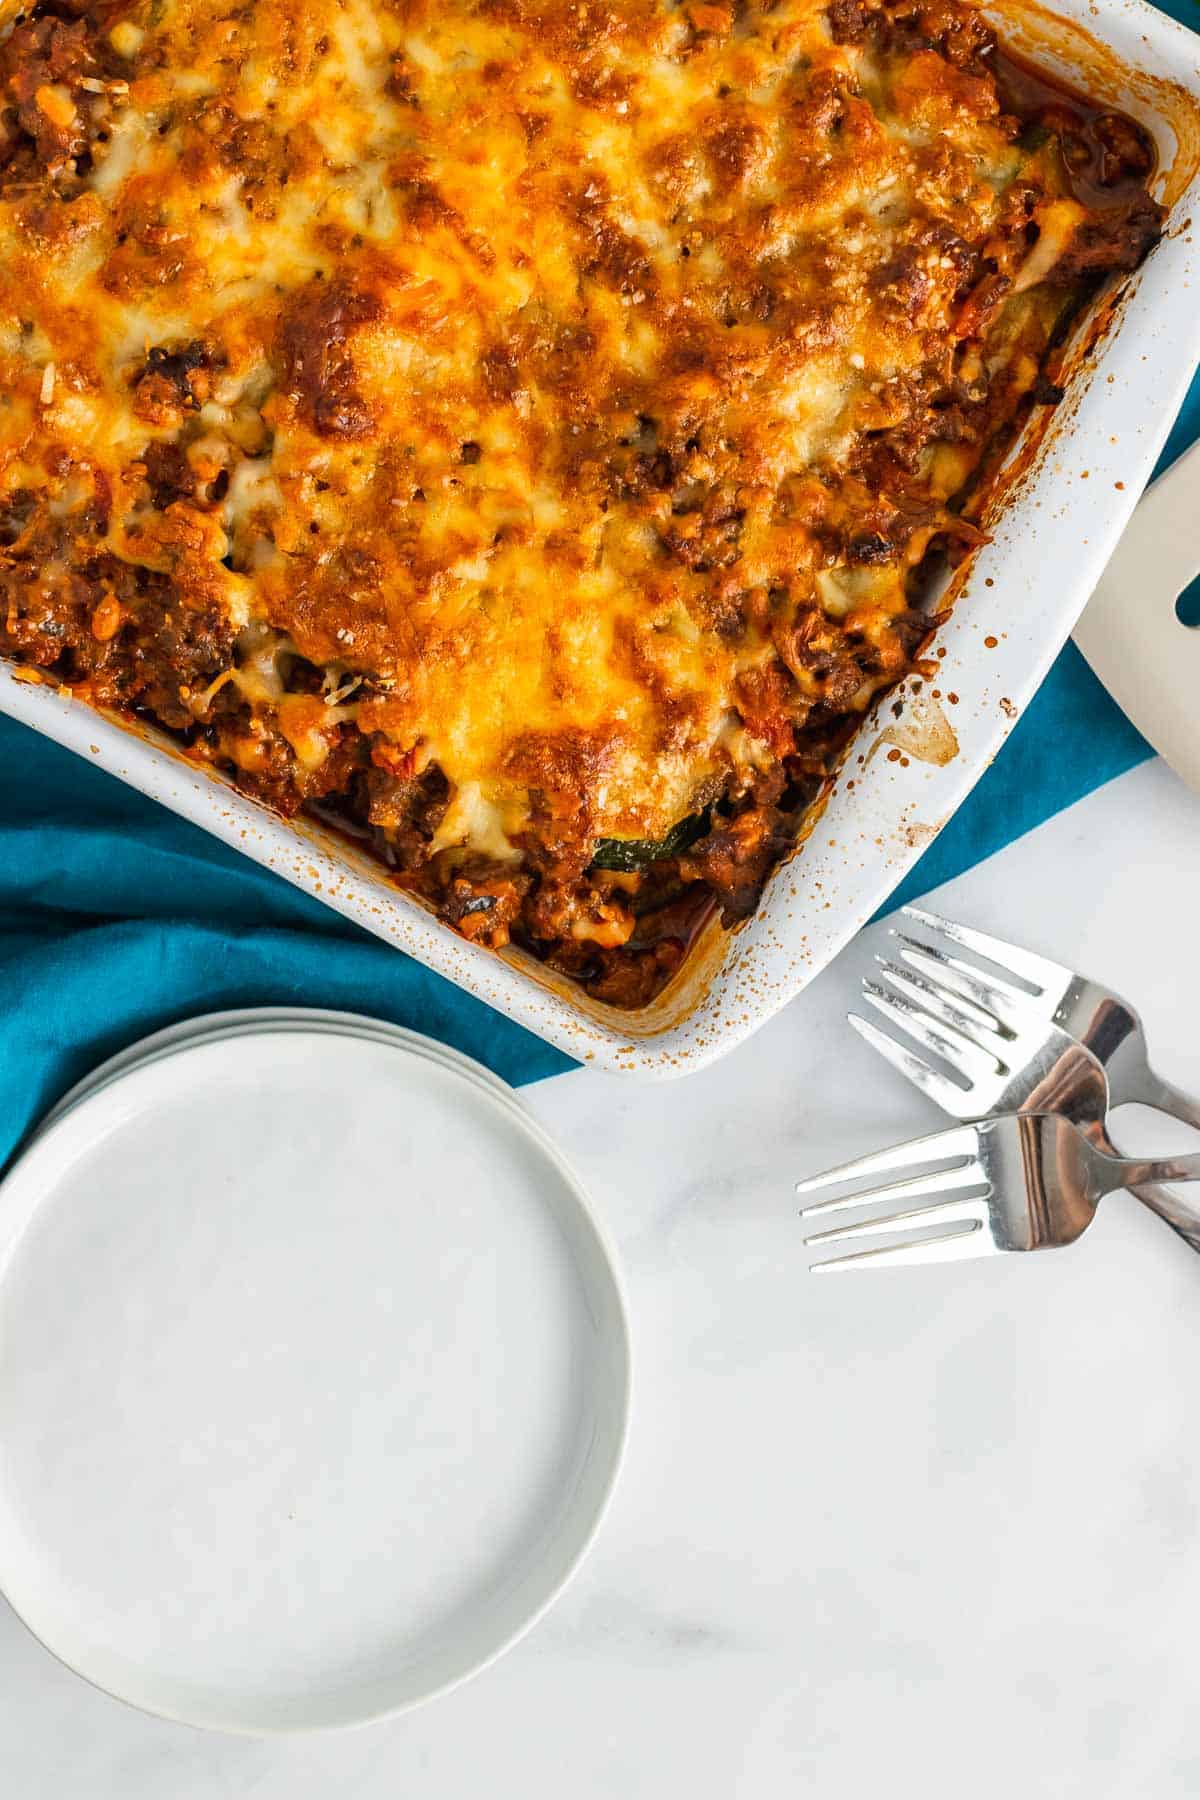 Fully baked lasagna in a baking dish next to an empty plate and two forks